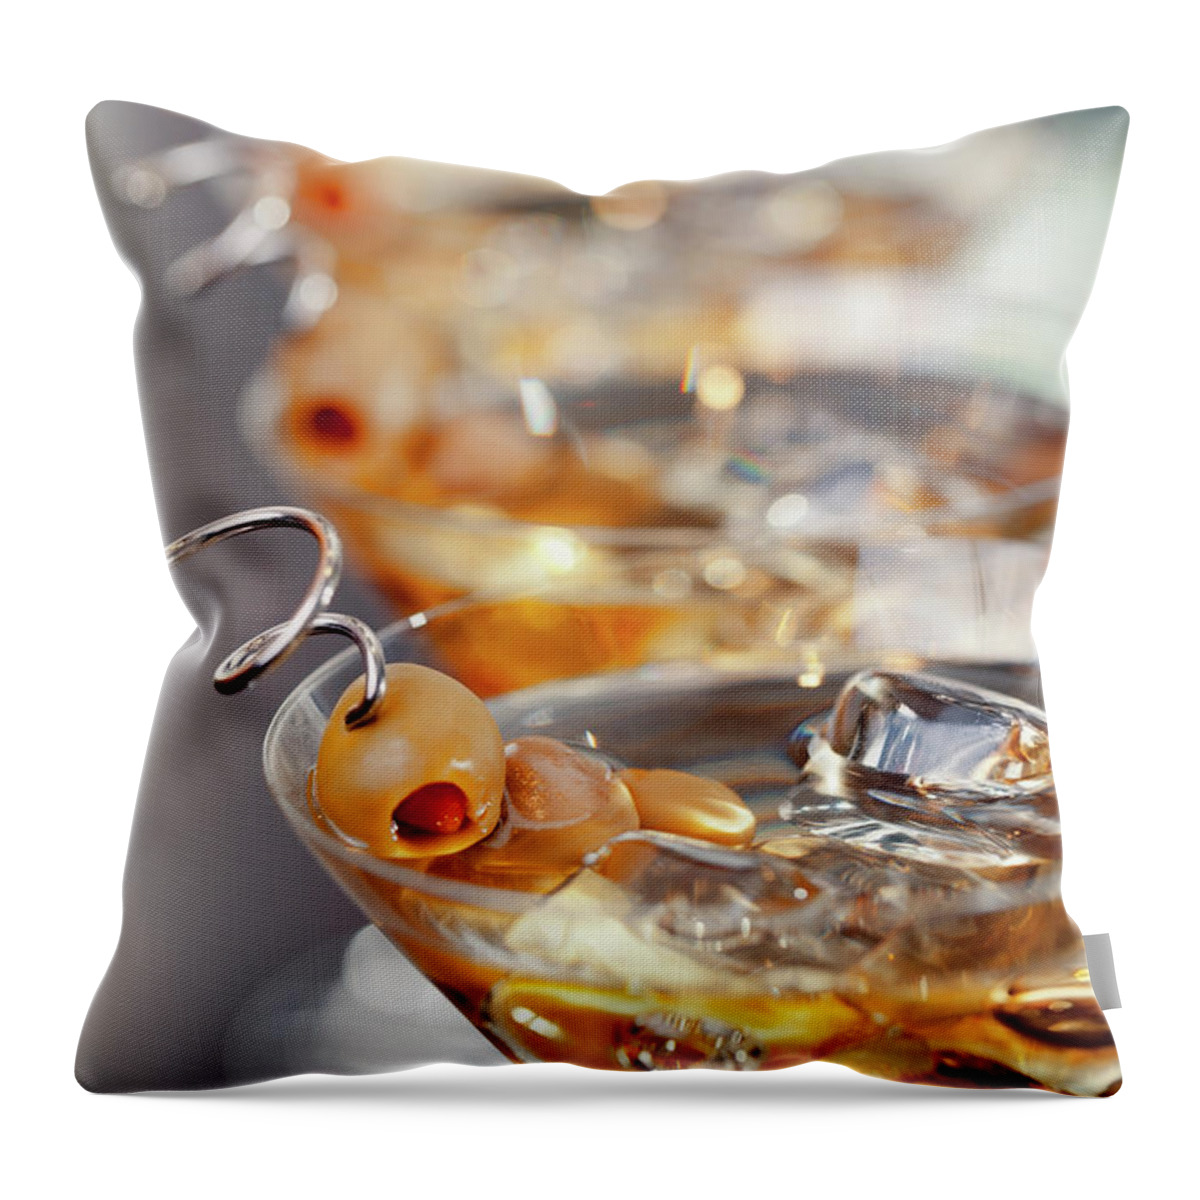 Cool Attitude Throw Pillow featuring the photograph Cocktails Collection - Martini by Ivanmateev